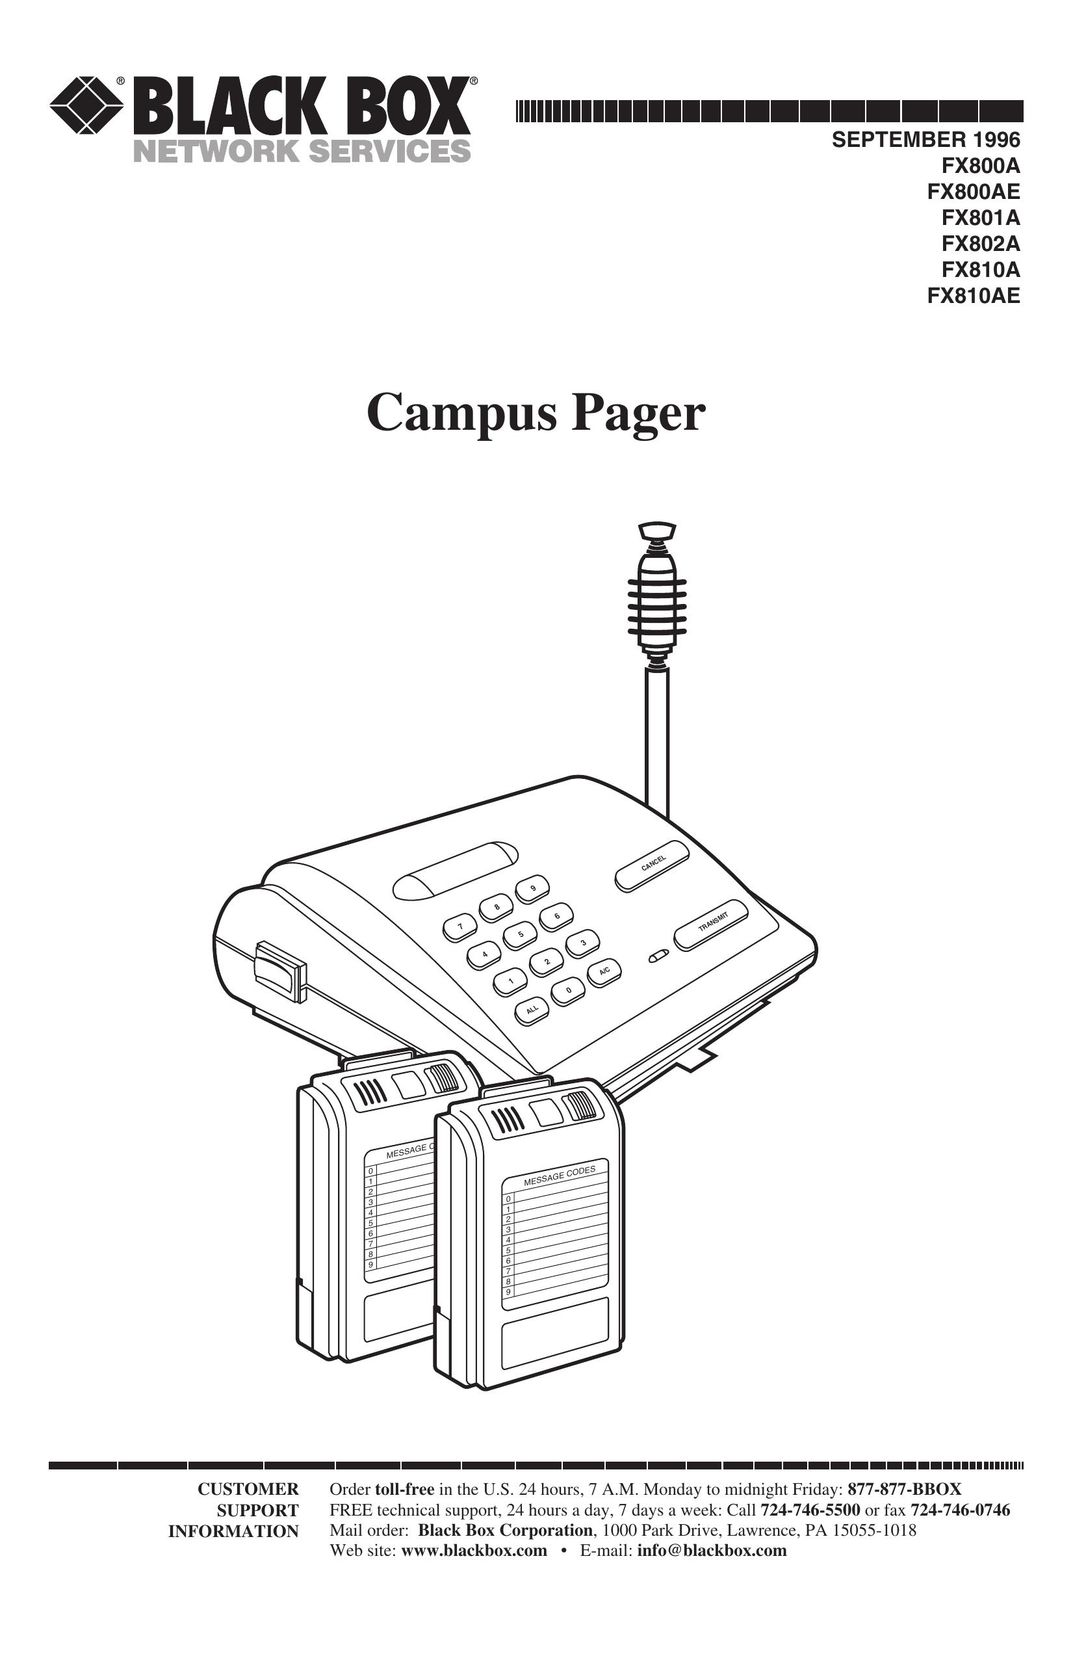 Black Box FX801A Pager User Manual